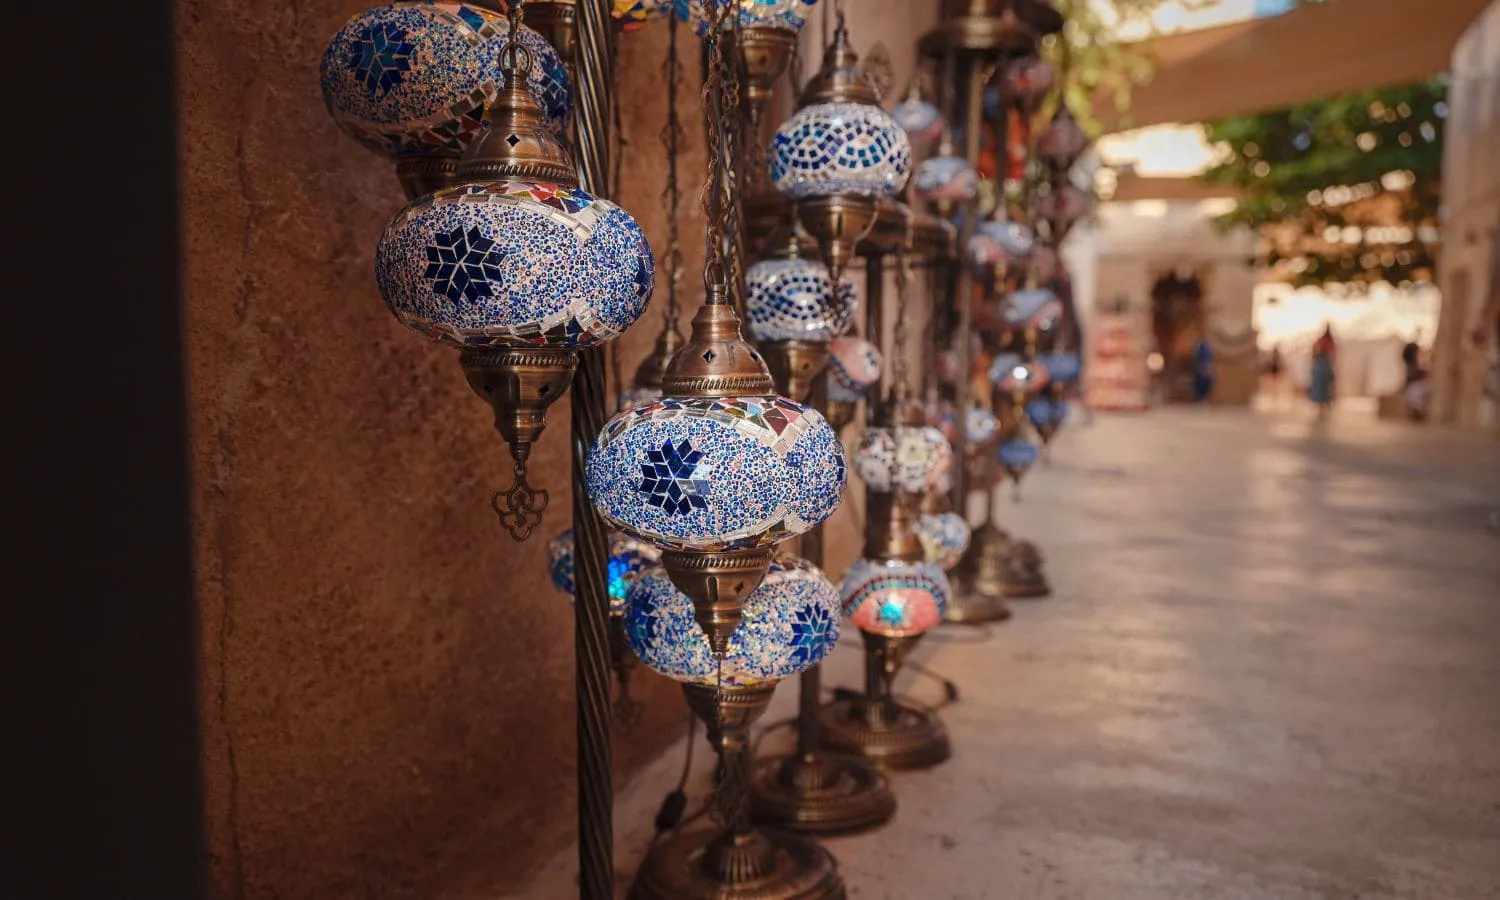 Local craftsmanship, sold in shops in the historical district of Al Seef